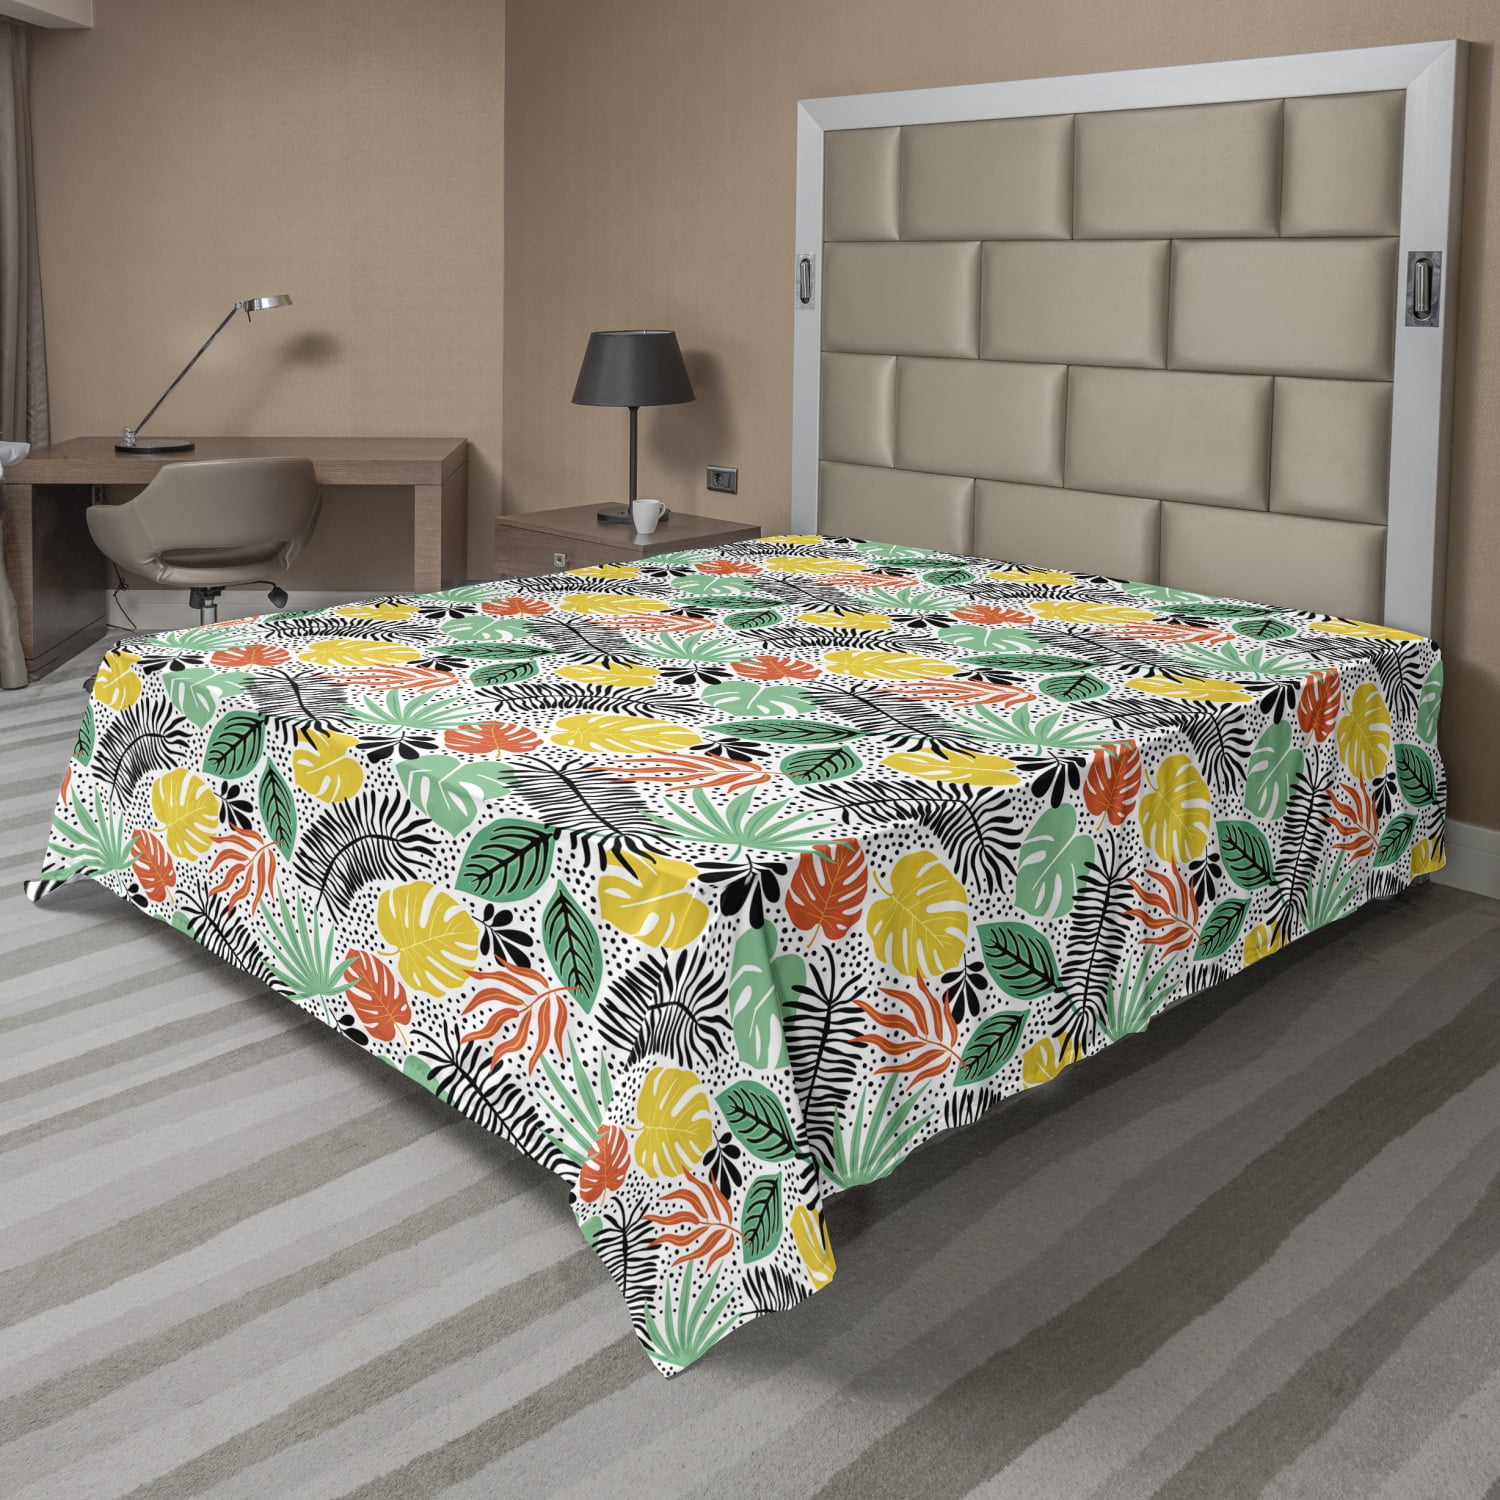 Tropical Flat Sheet, Monstera Leaves with Tropical Botanical Elements ...